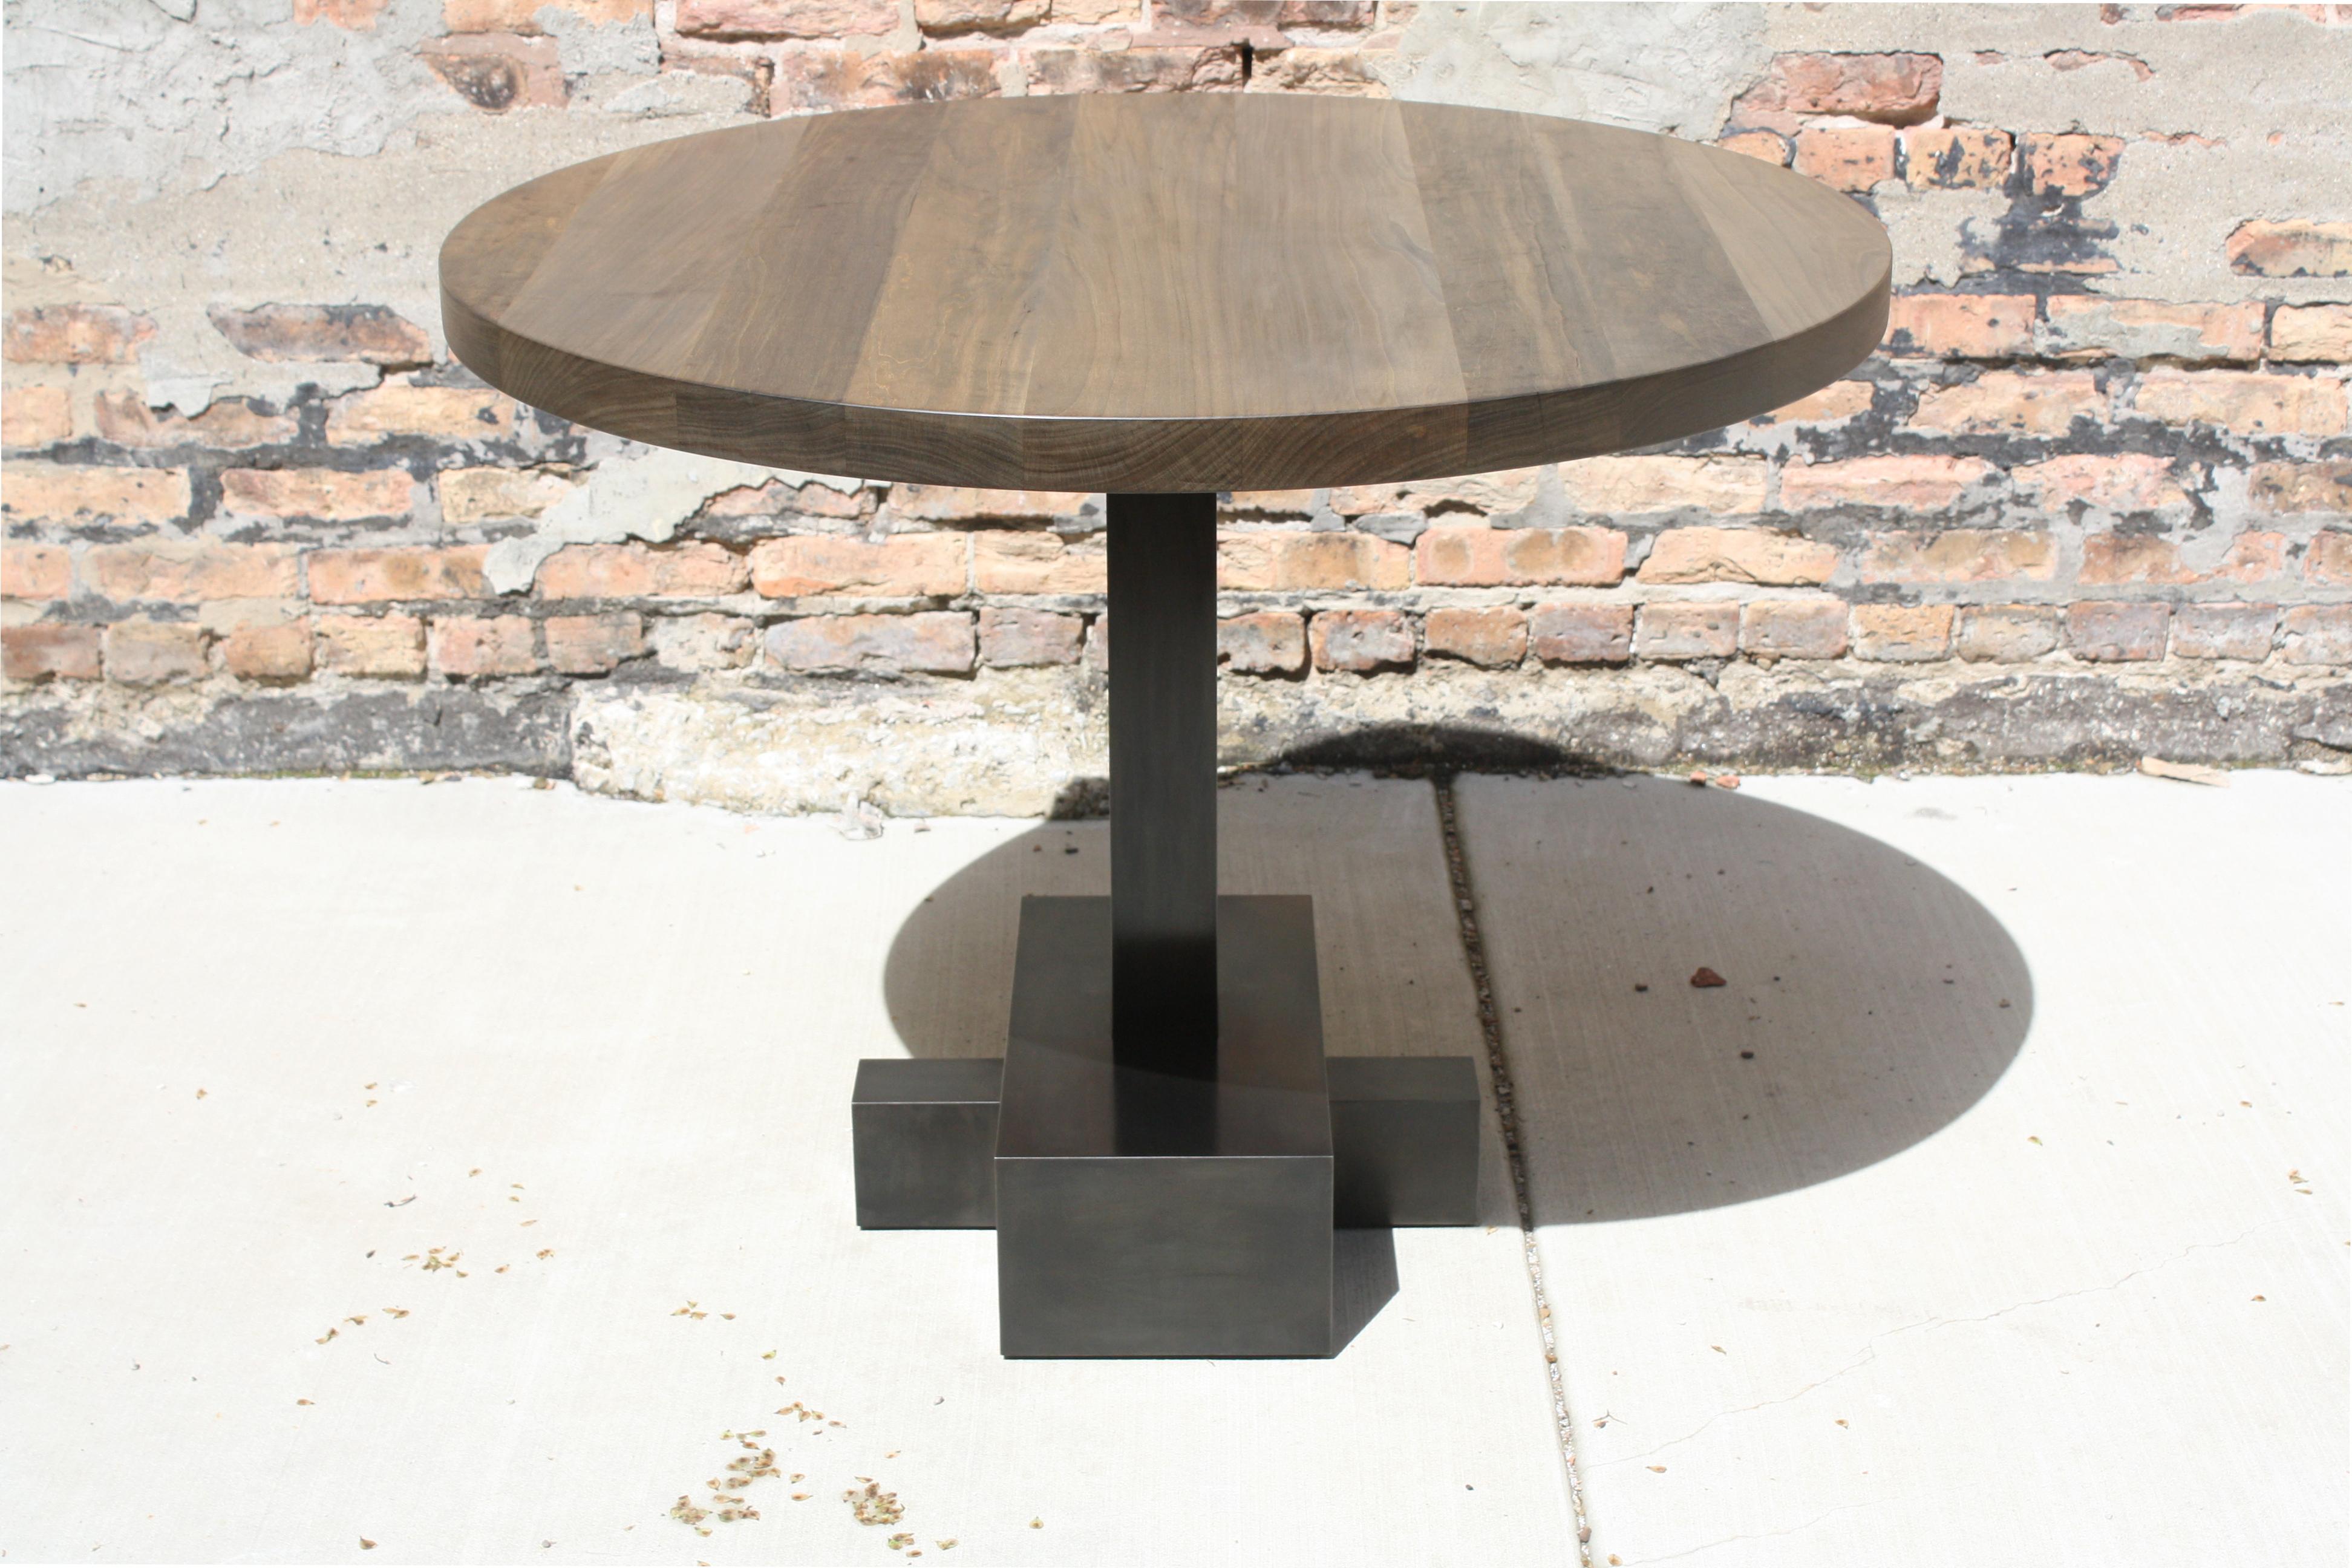 Shown in oxidized maple and blackened steel

Measures: 40” diameter x 29” high - square edge

This customizable pedestal table is shown with a seamlessly welded, blackened steel base with a 40” oxidized maple tabletop.

Available in custom